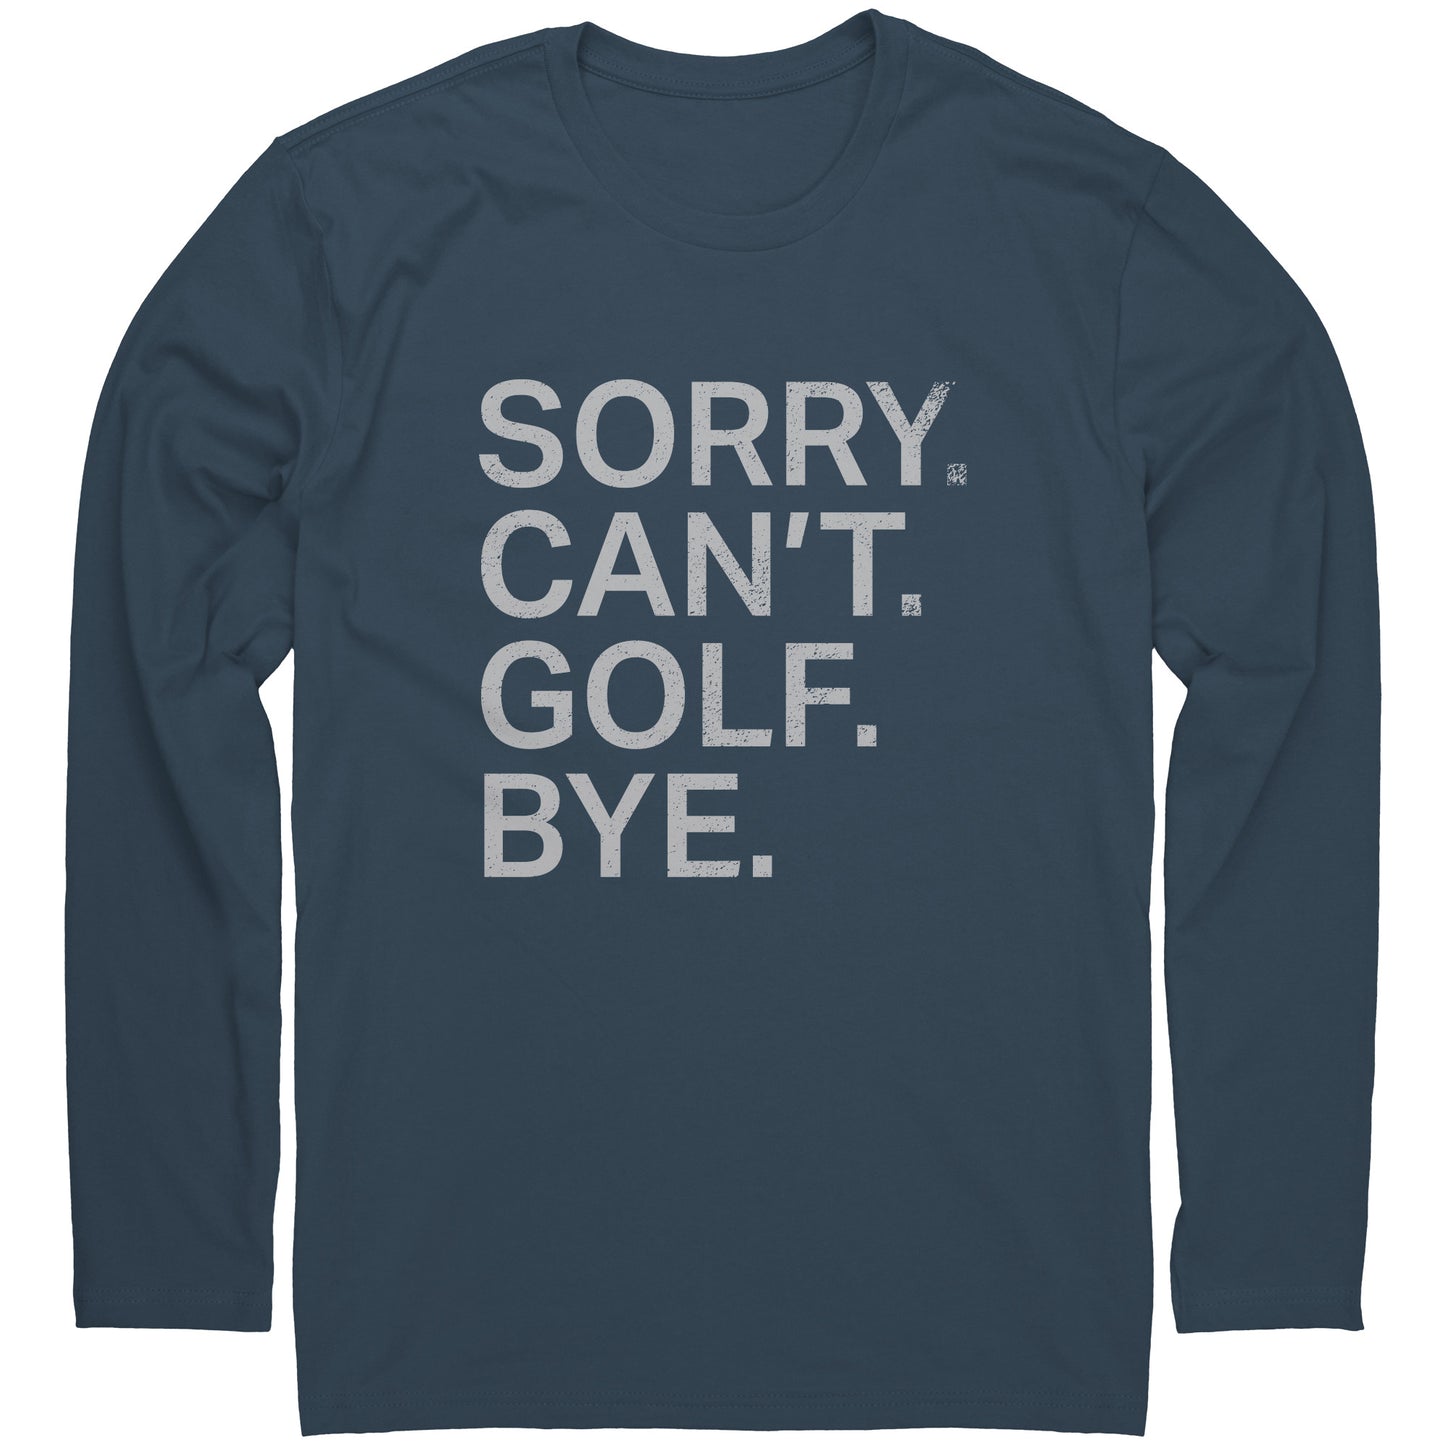 Sorry. Can't. Golf. Bye. Long-Sleeve T-Shirt.